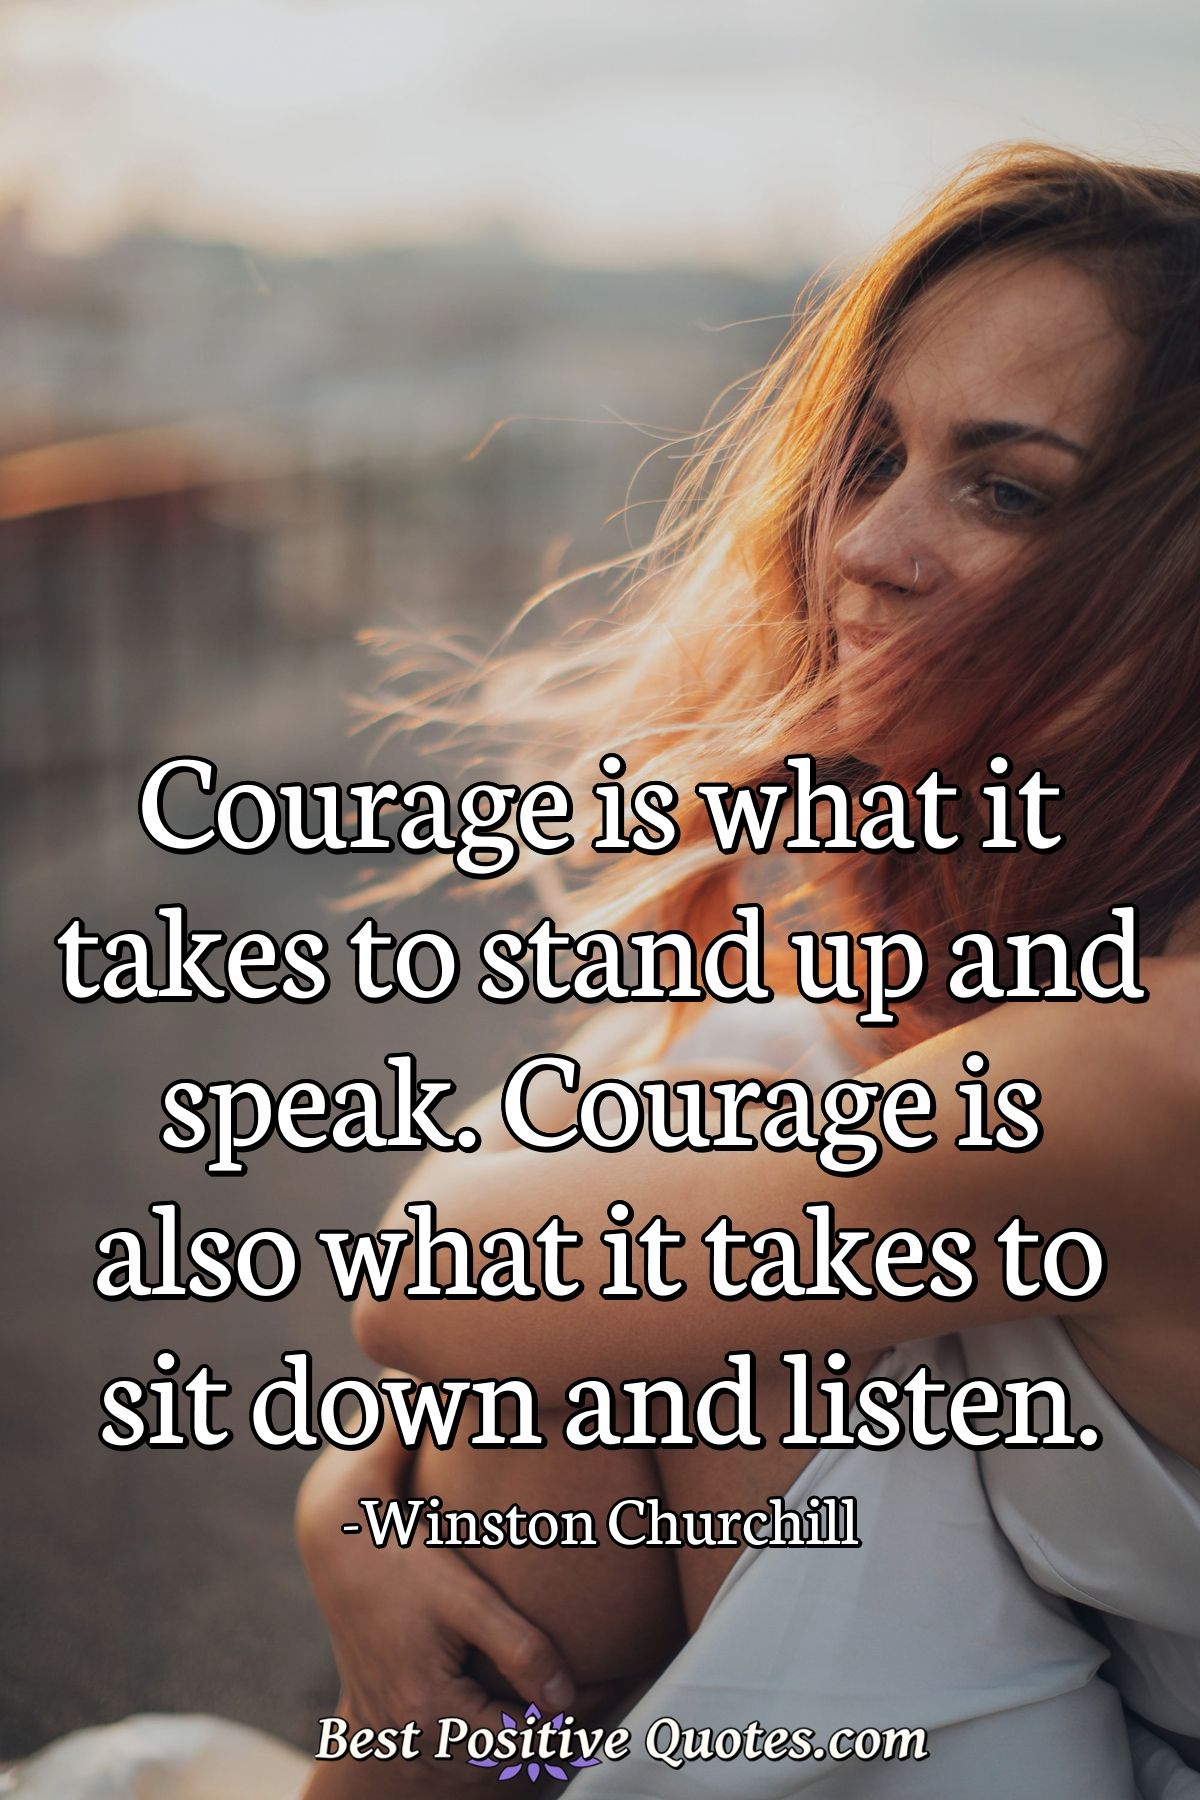 Courage is what it takes to stand up and speak. Courage is also what it takes to sit down and listen. - Winston Churchill